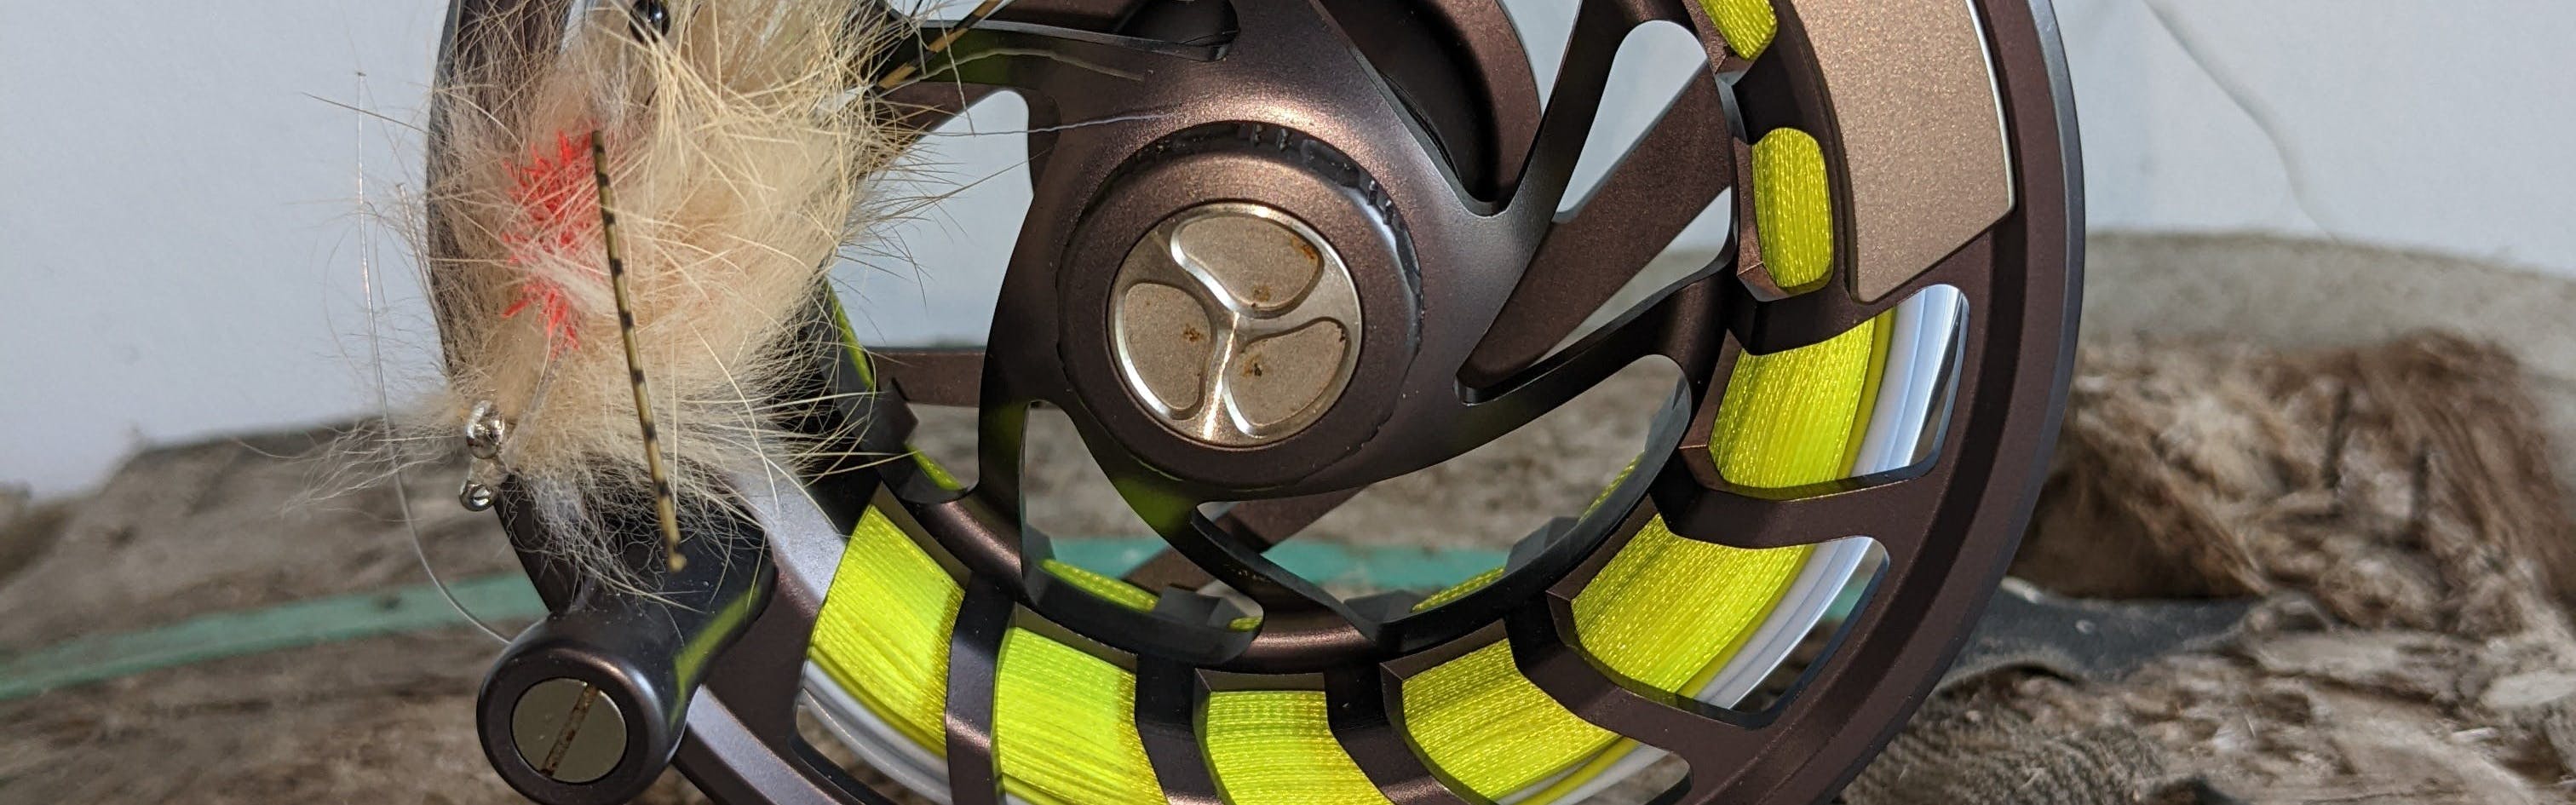 Jay's Unbiased Review of Hatch Outdoors Fly Reels and Gear